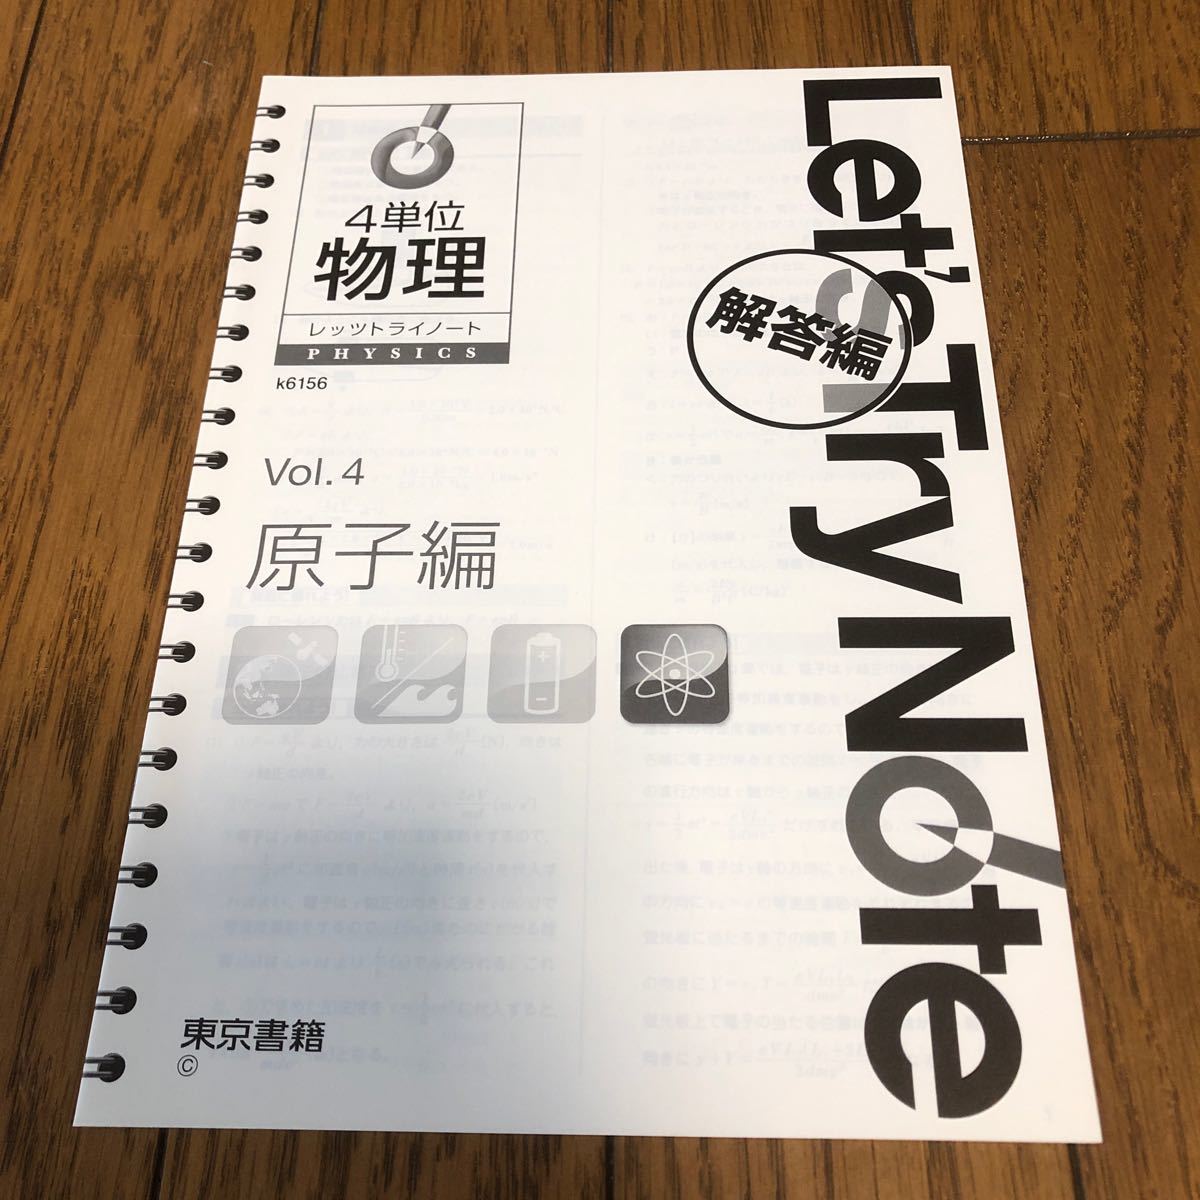 Let‘s Try Note 物理　Vol.2、3、4 レッツトライノート